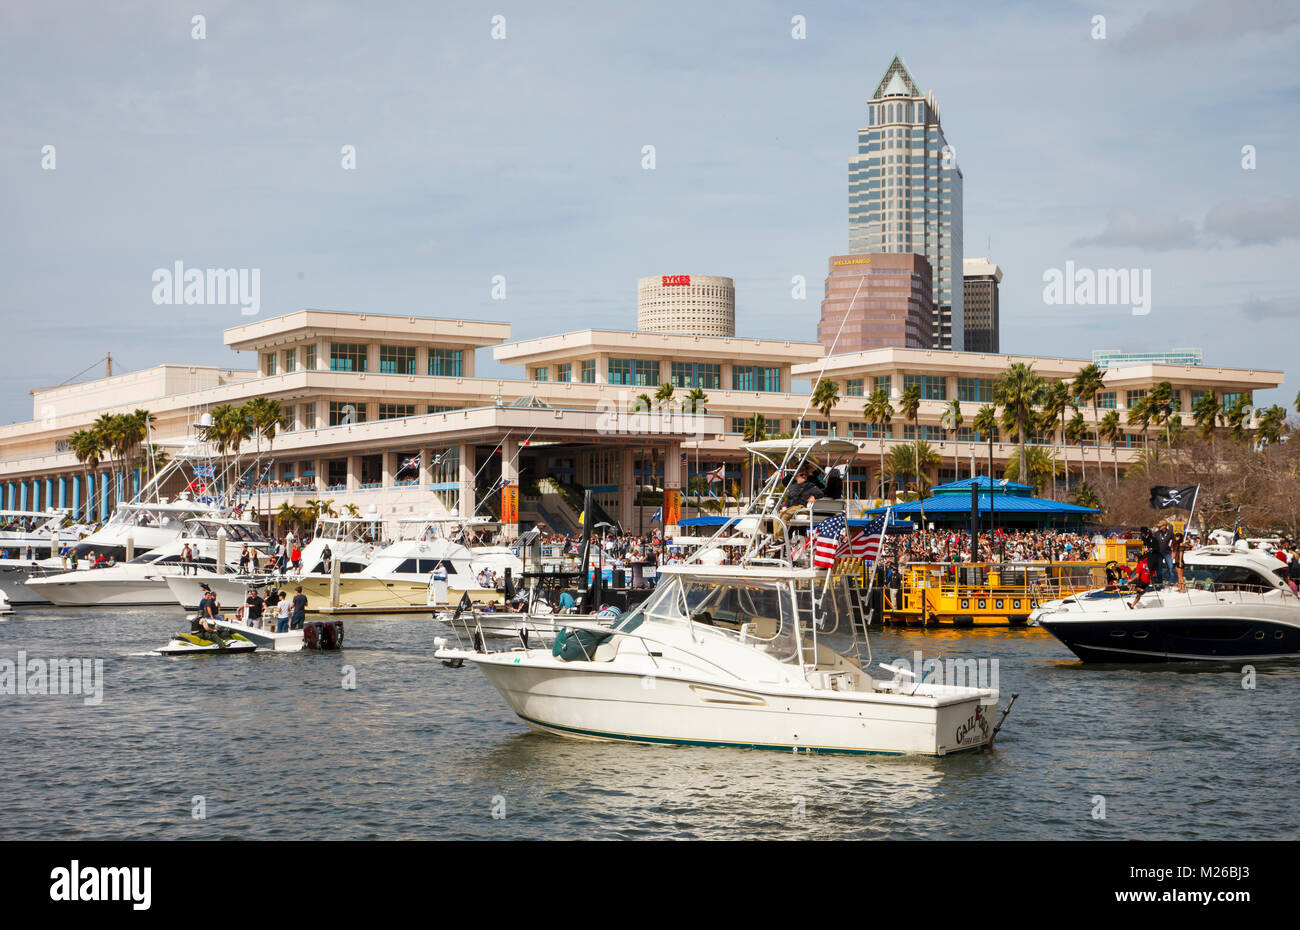 Boaters take part in the 2018 Gasparilla Pirate invasion festival along the waterfront of Downtown Tampa, Florida. (Photo by Matt May/Alamy) Stock Photo